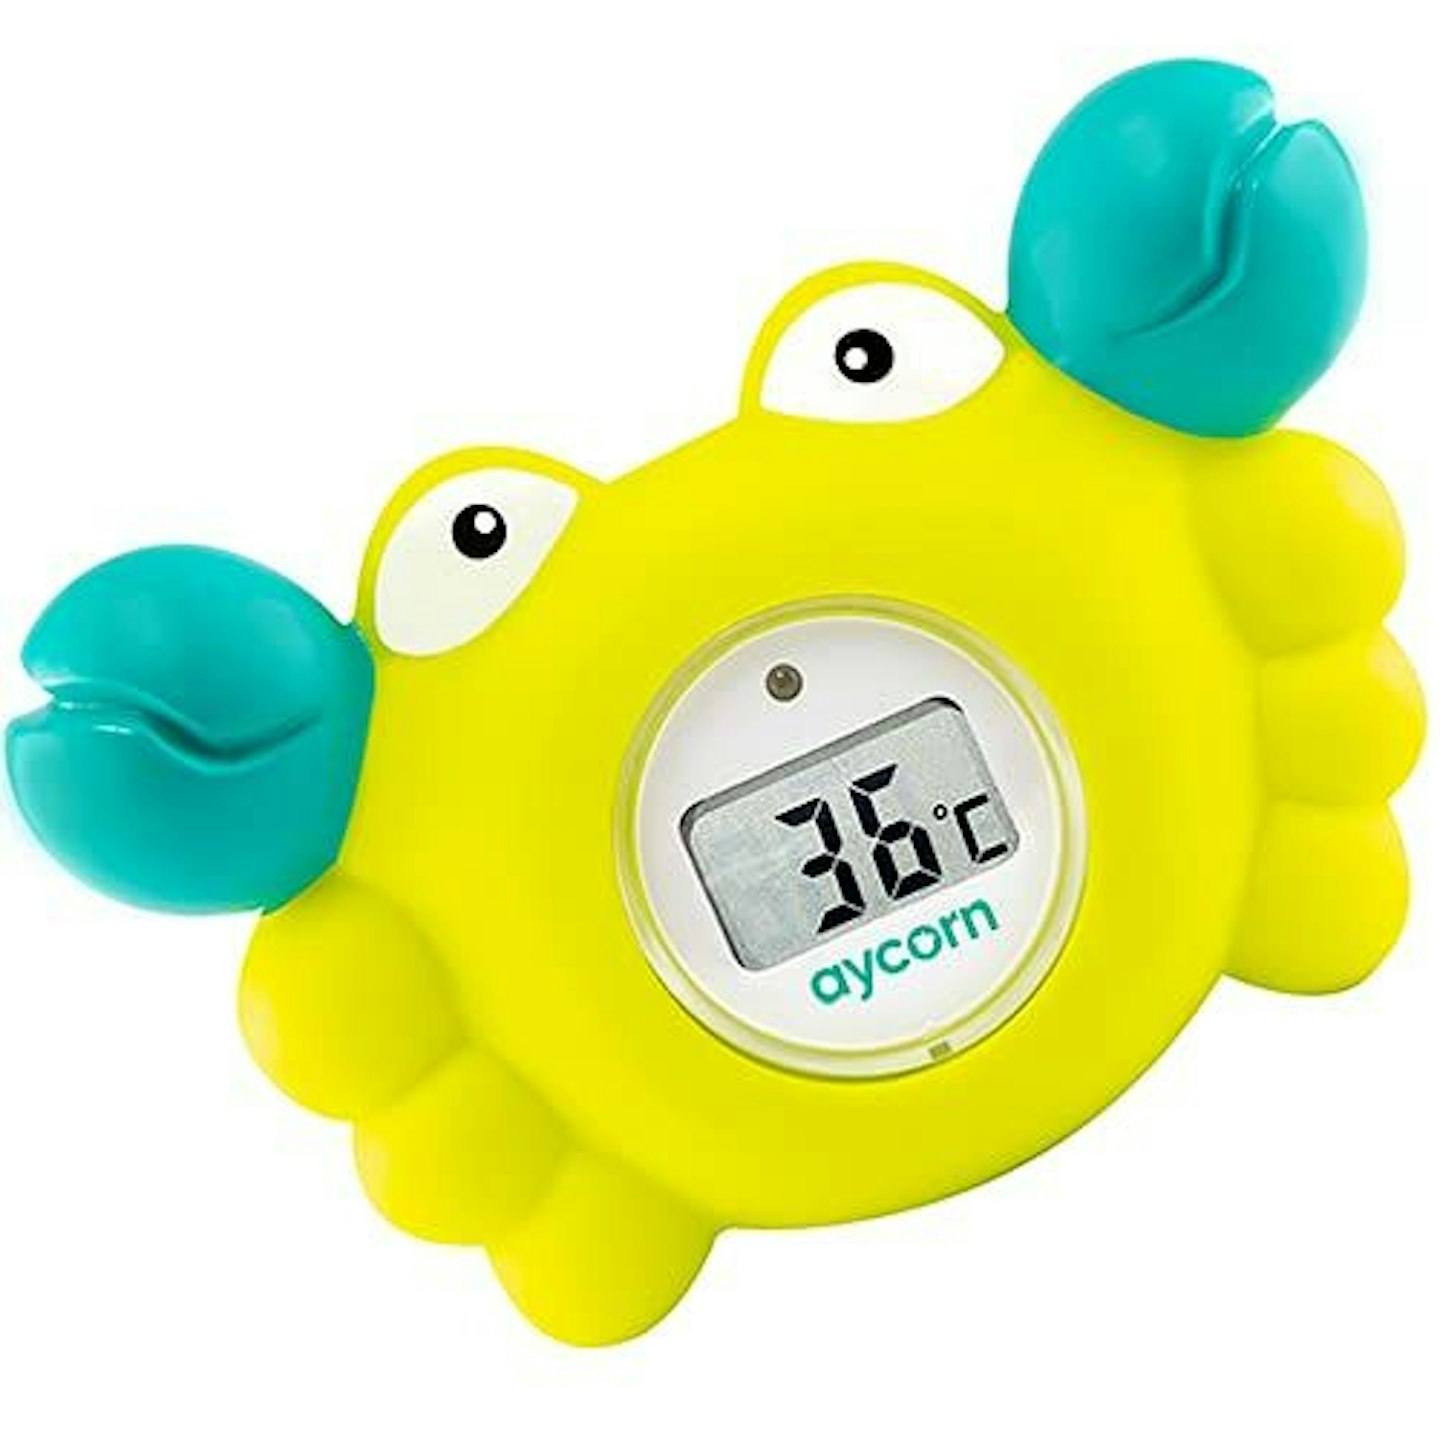 1 Bath Thermometer Nursery Baby Room Temperature Toddler Child